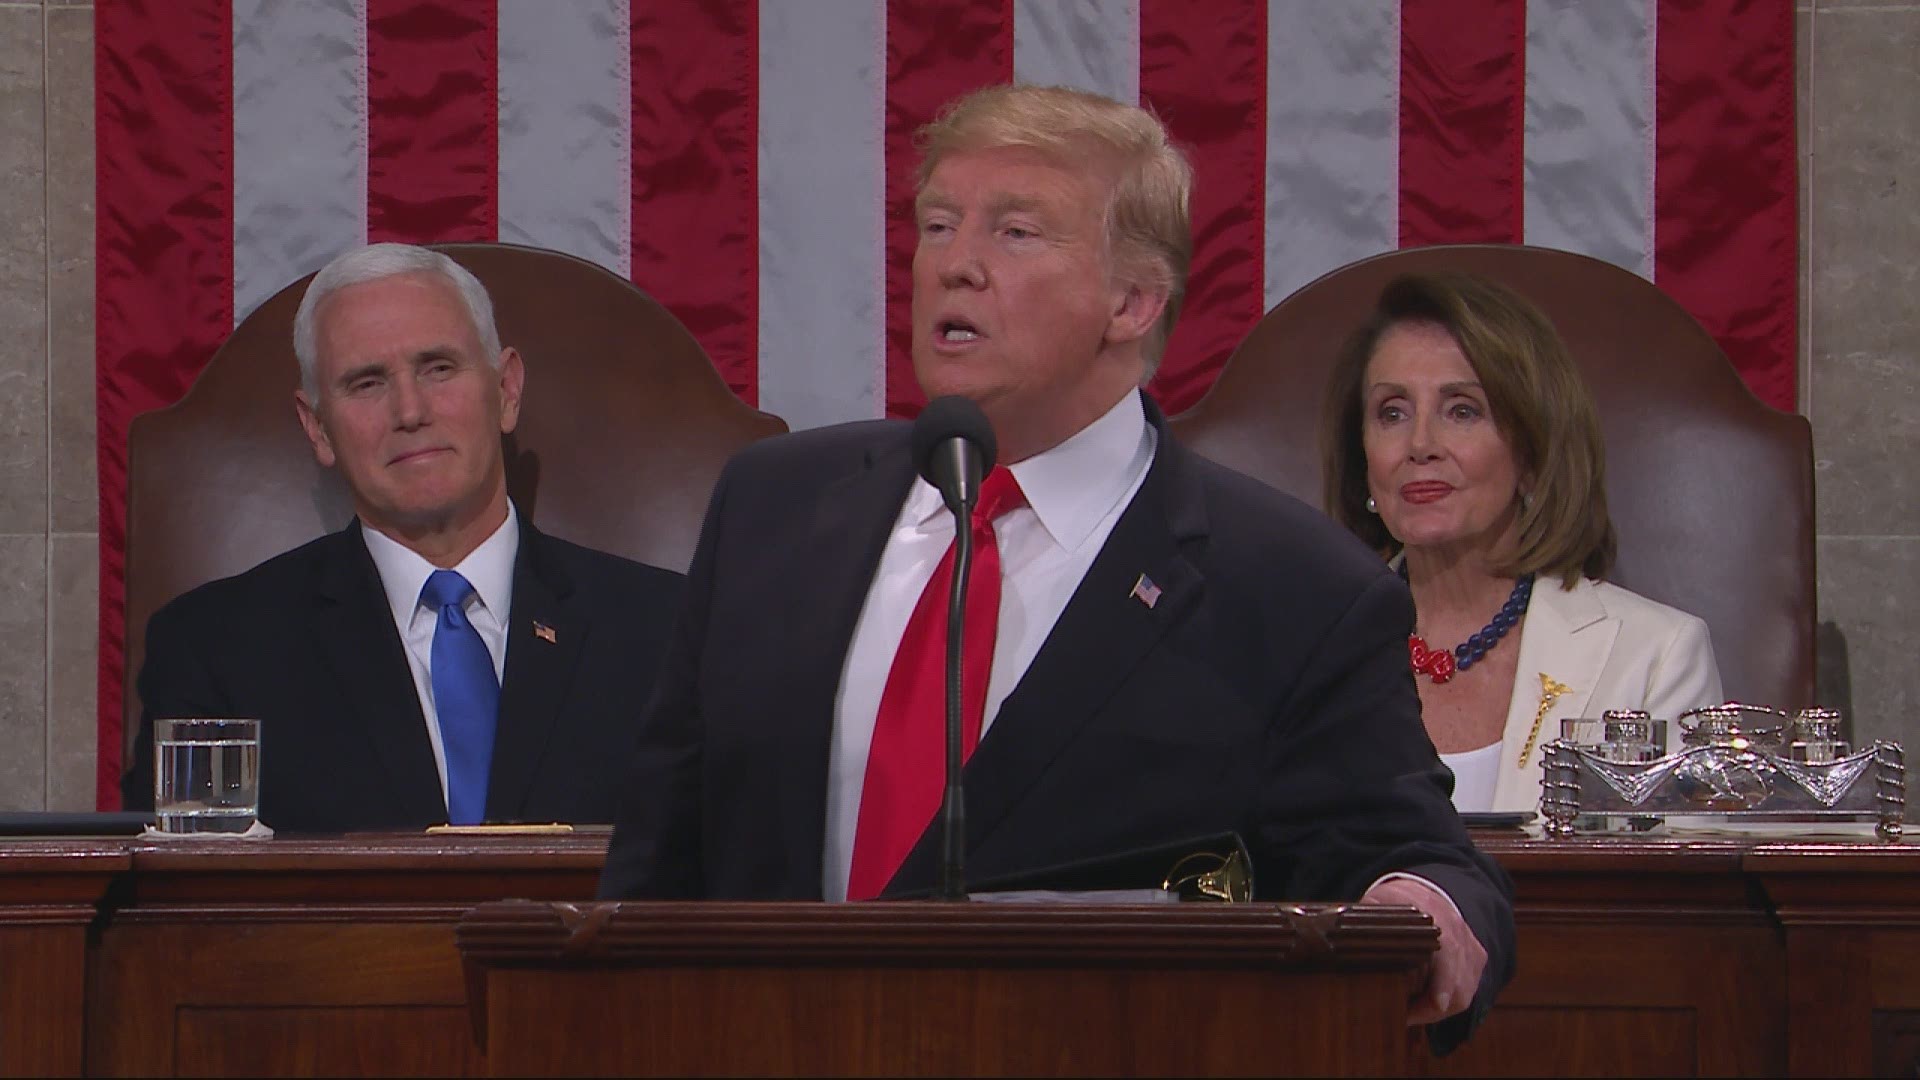 Trump, whose red tie was oddly askew, declared 'our country is vibrant and our economy is thriving like never before.'